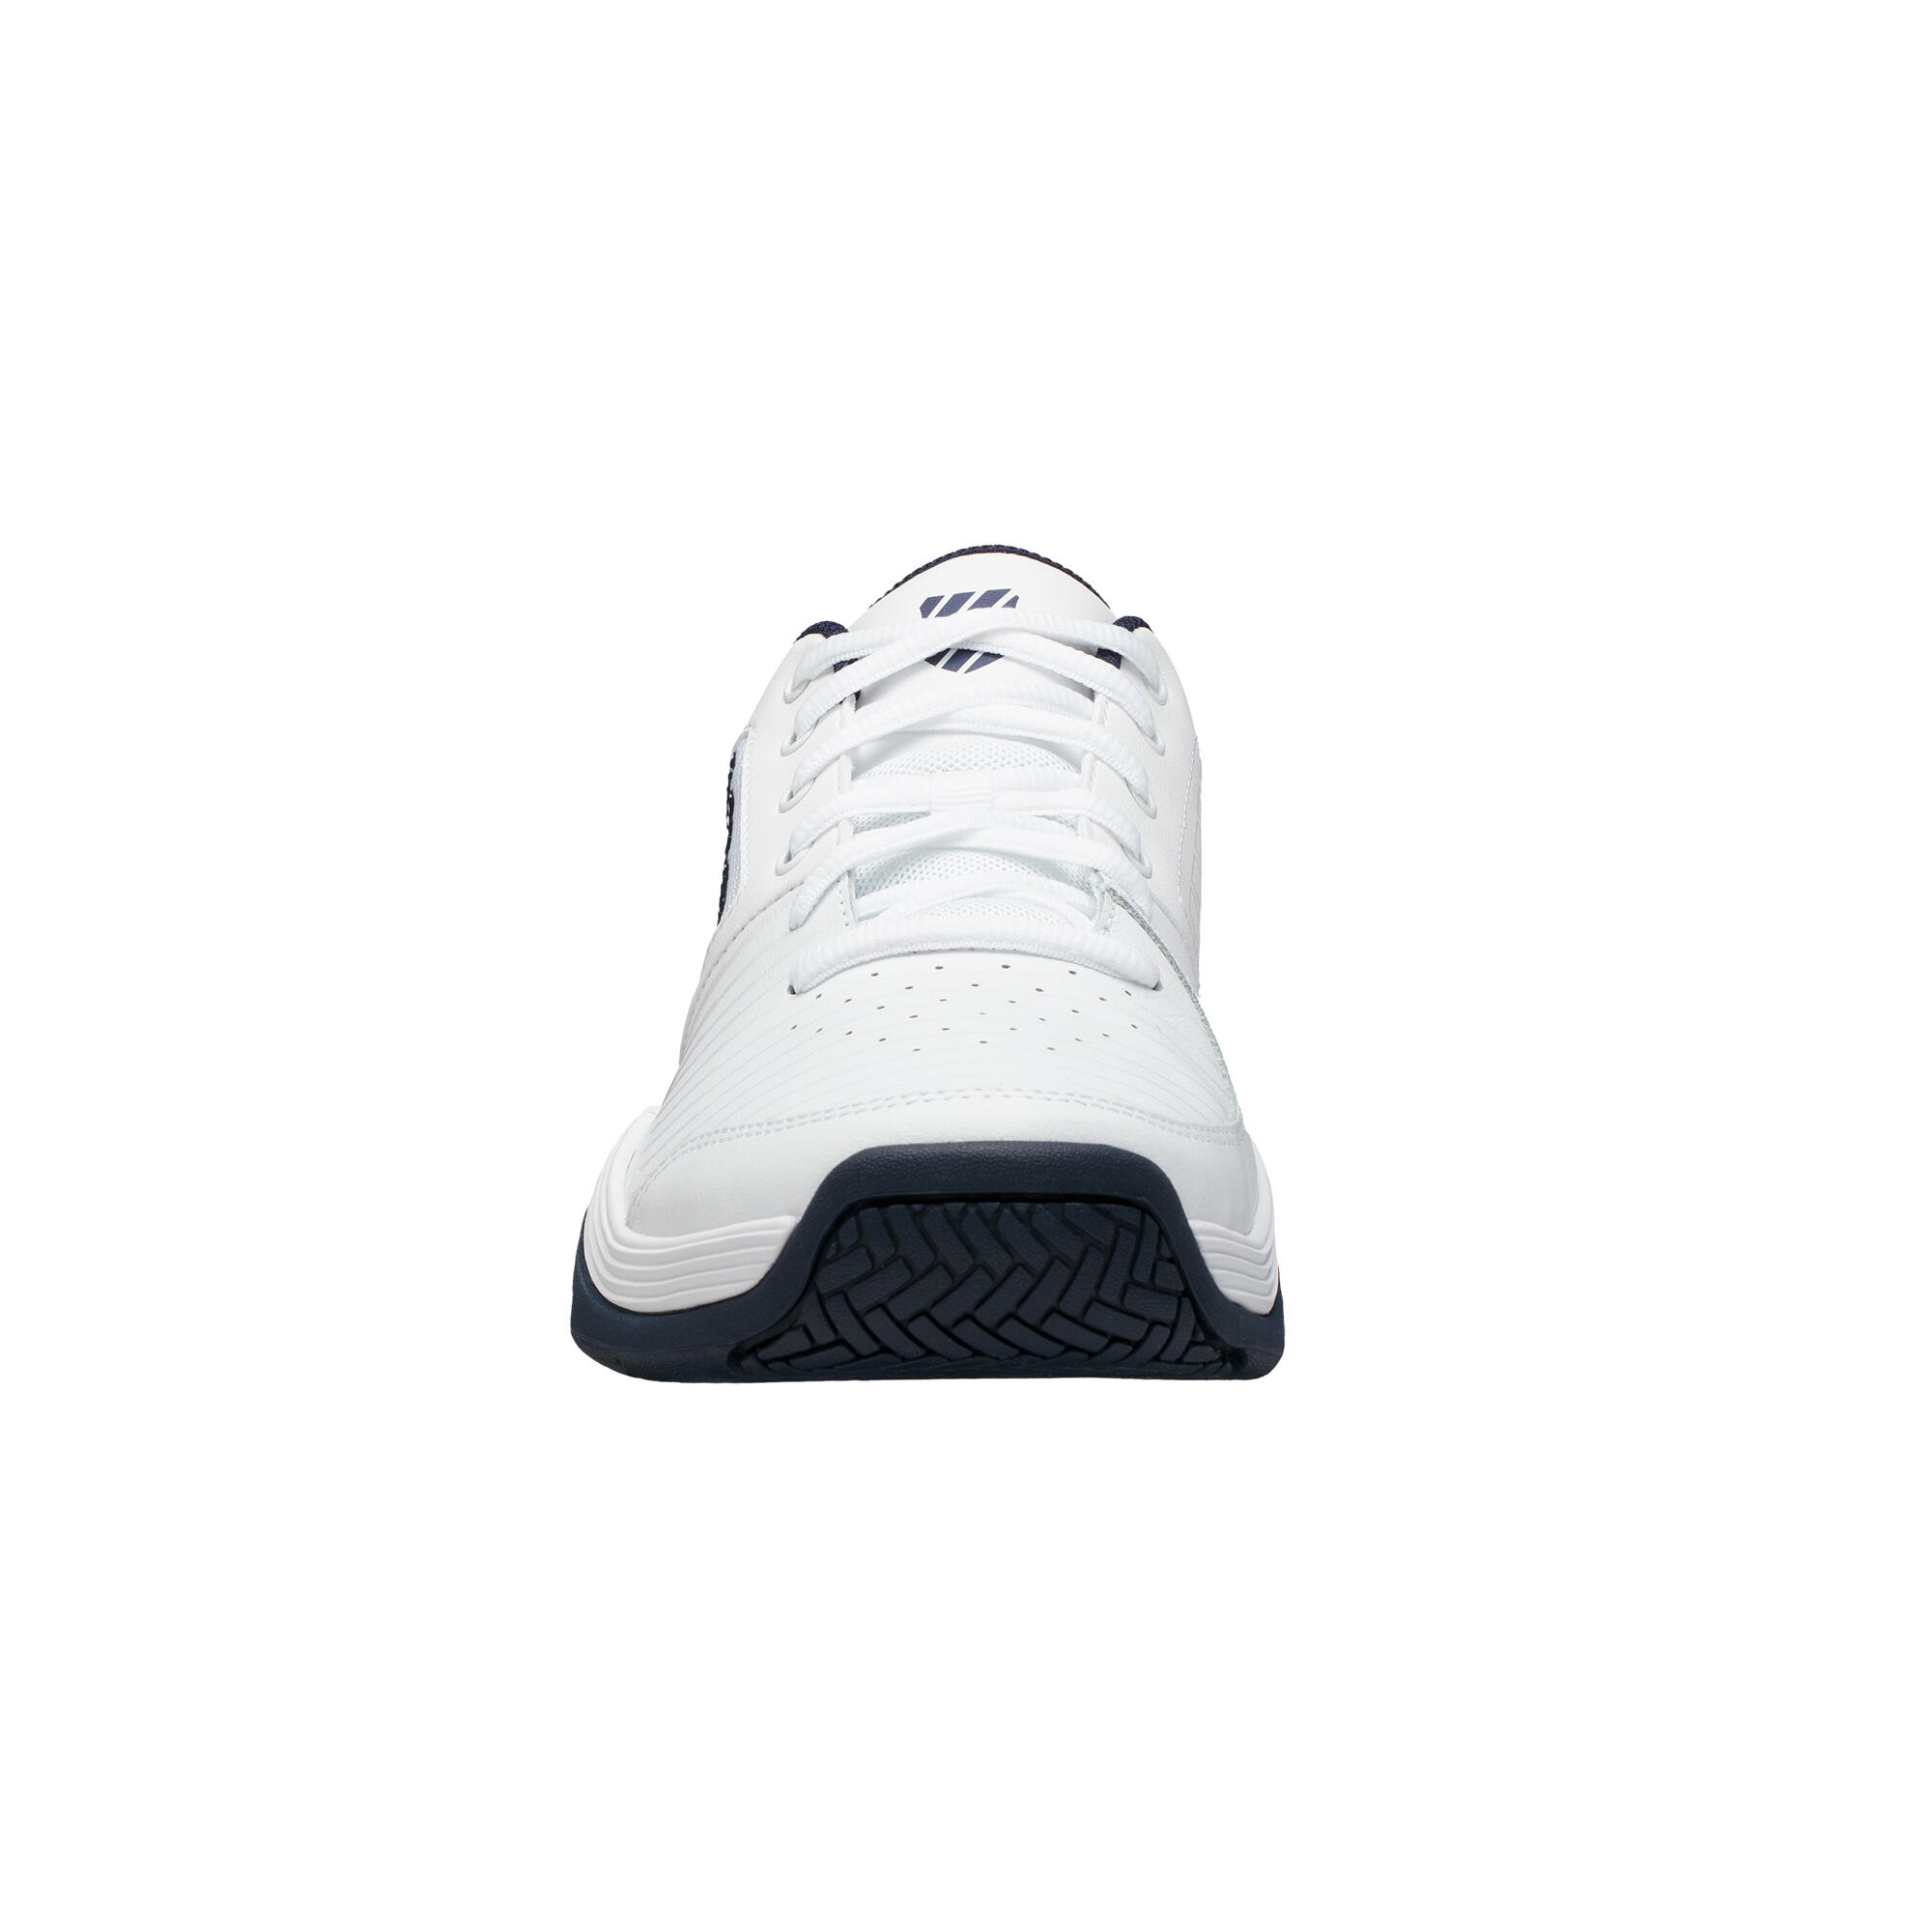 Men's Clay Court Tennis Shoes Court Express - White 4/6